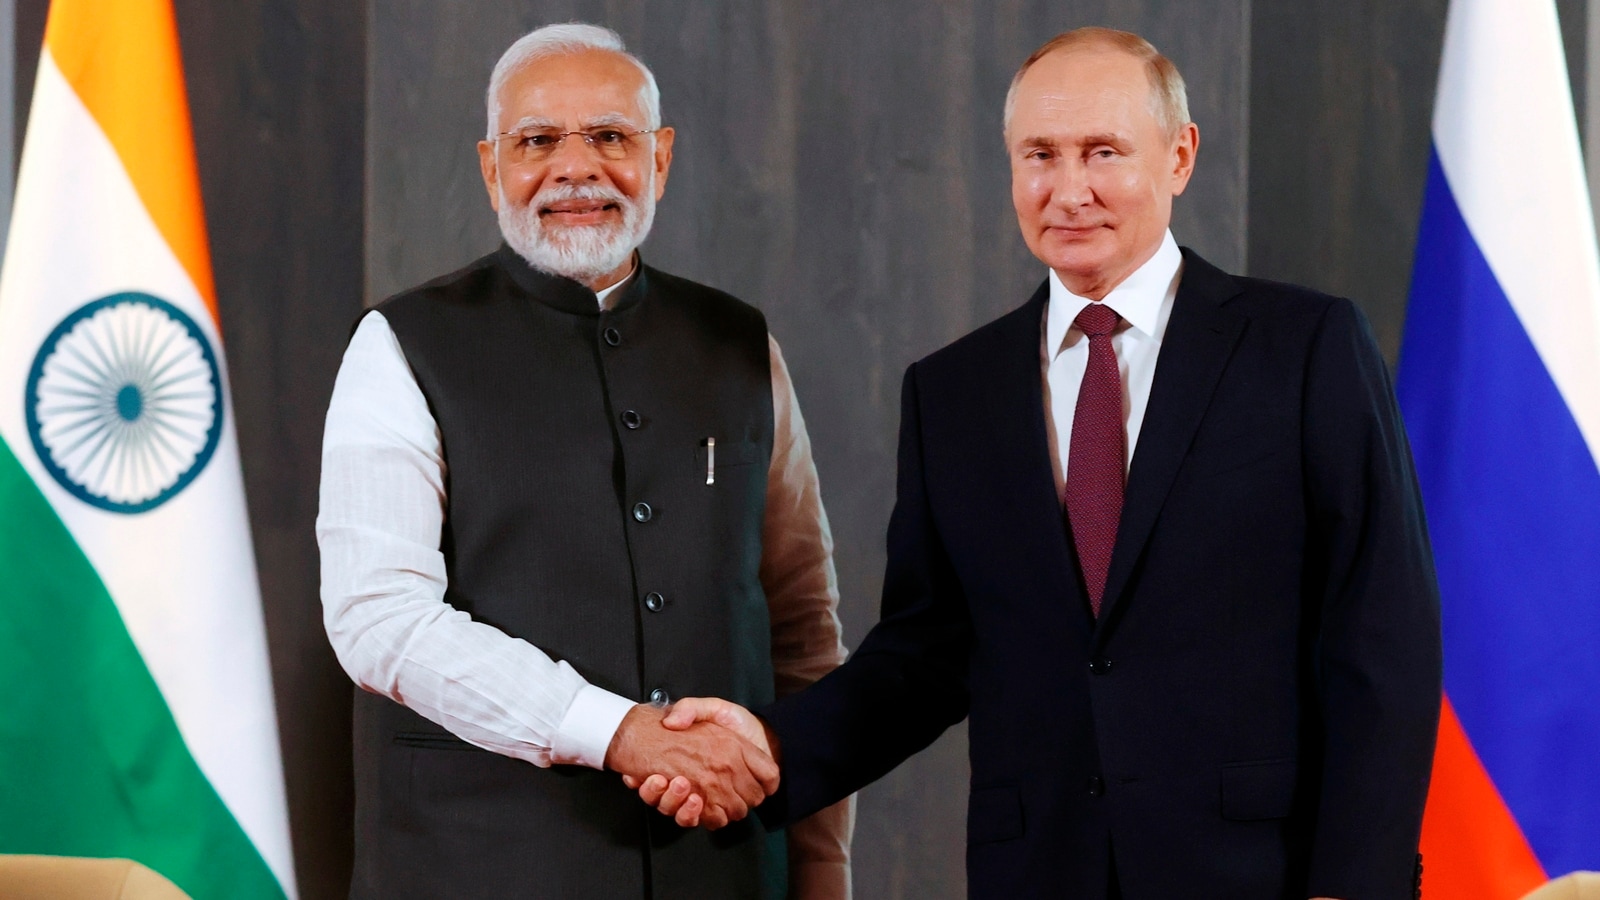 Russia's Putin reacts to PM Modi's 'peaceful dialogue' appeal in Ukraine | World News - Hindustan Times